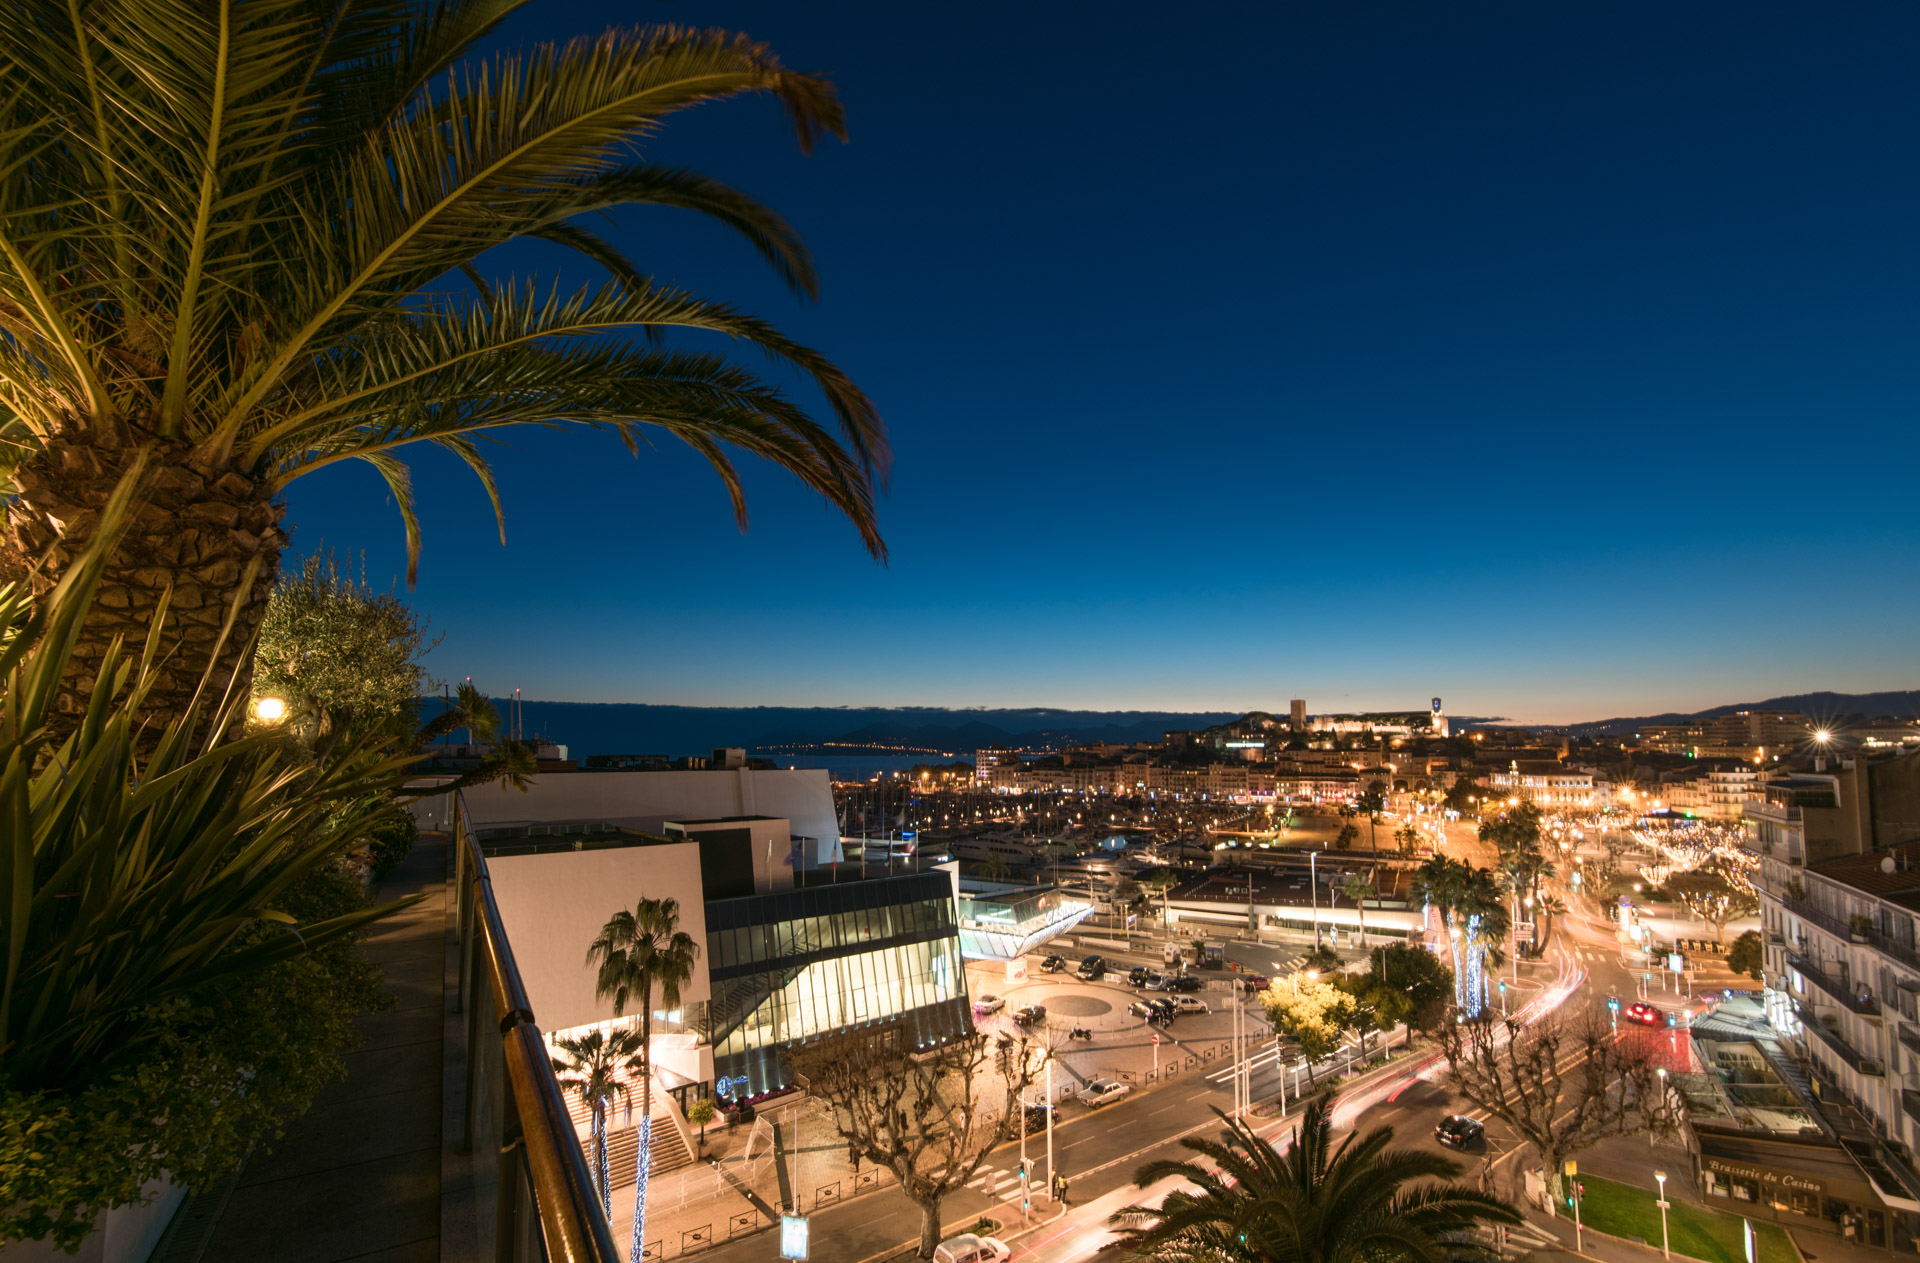 Night view from the penthouse facing le palais des festivals